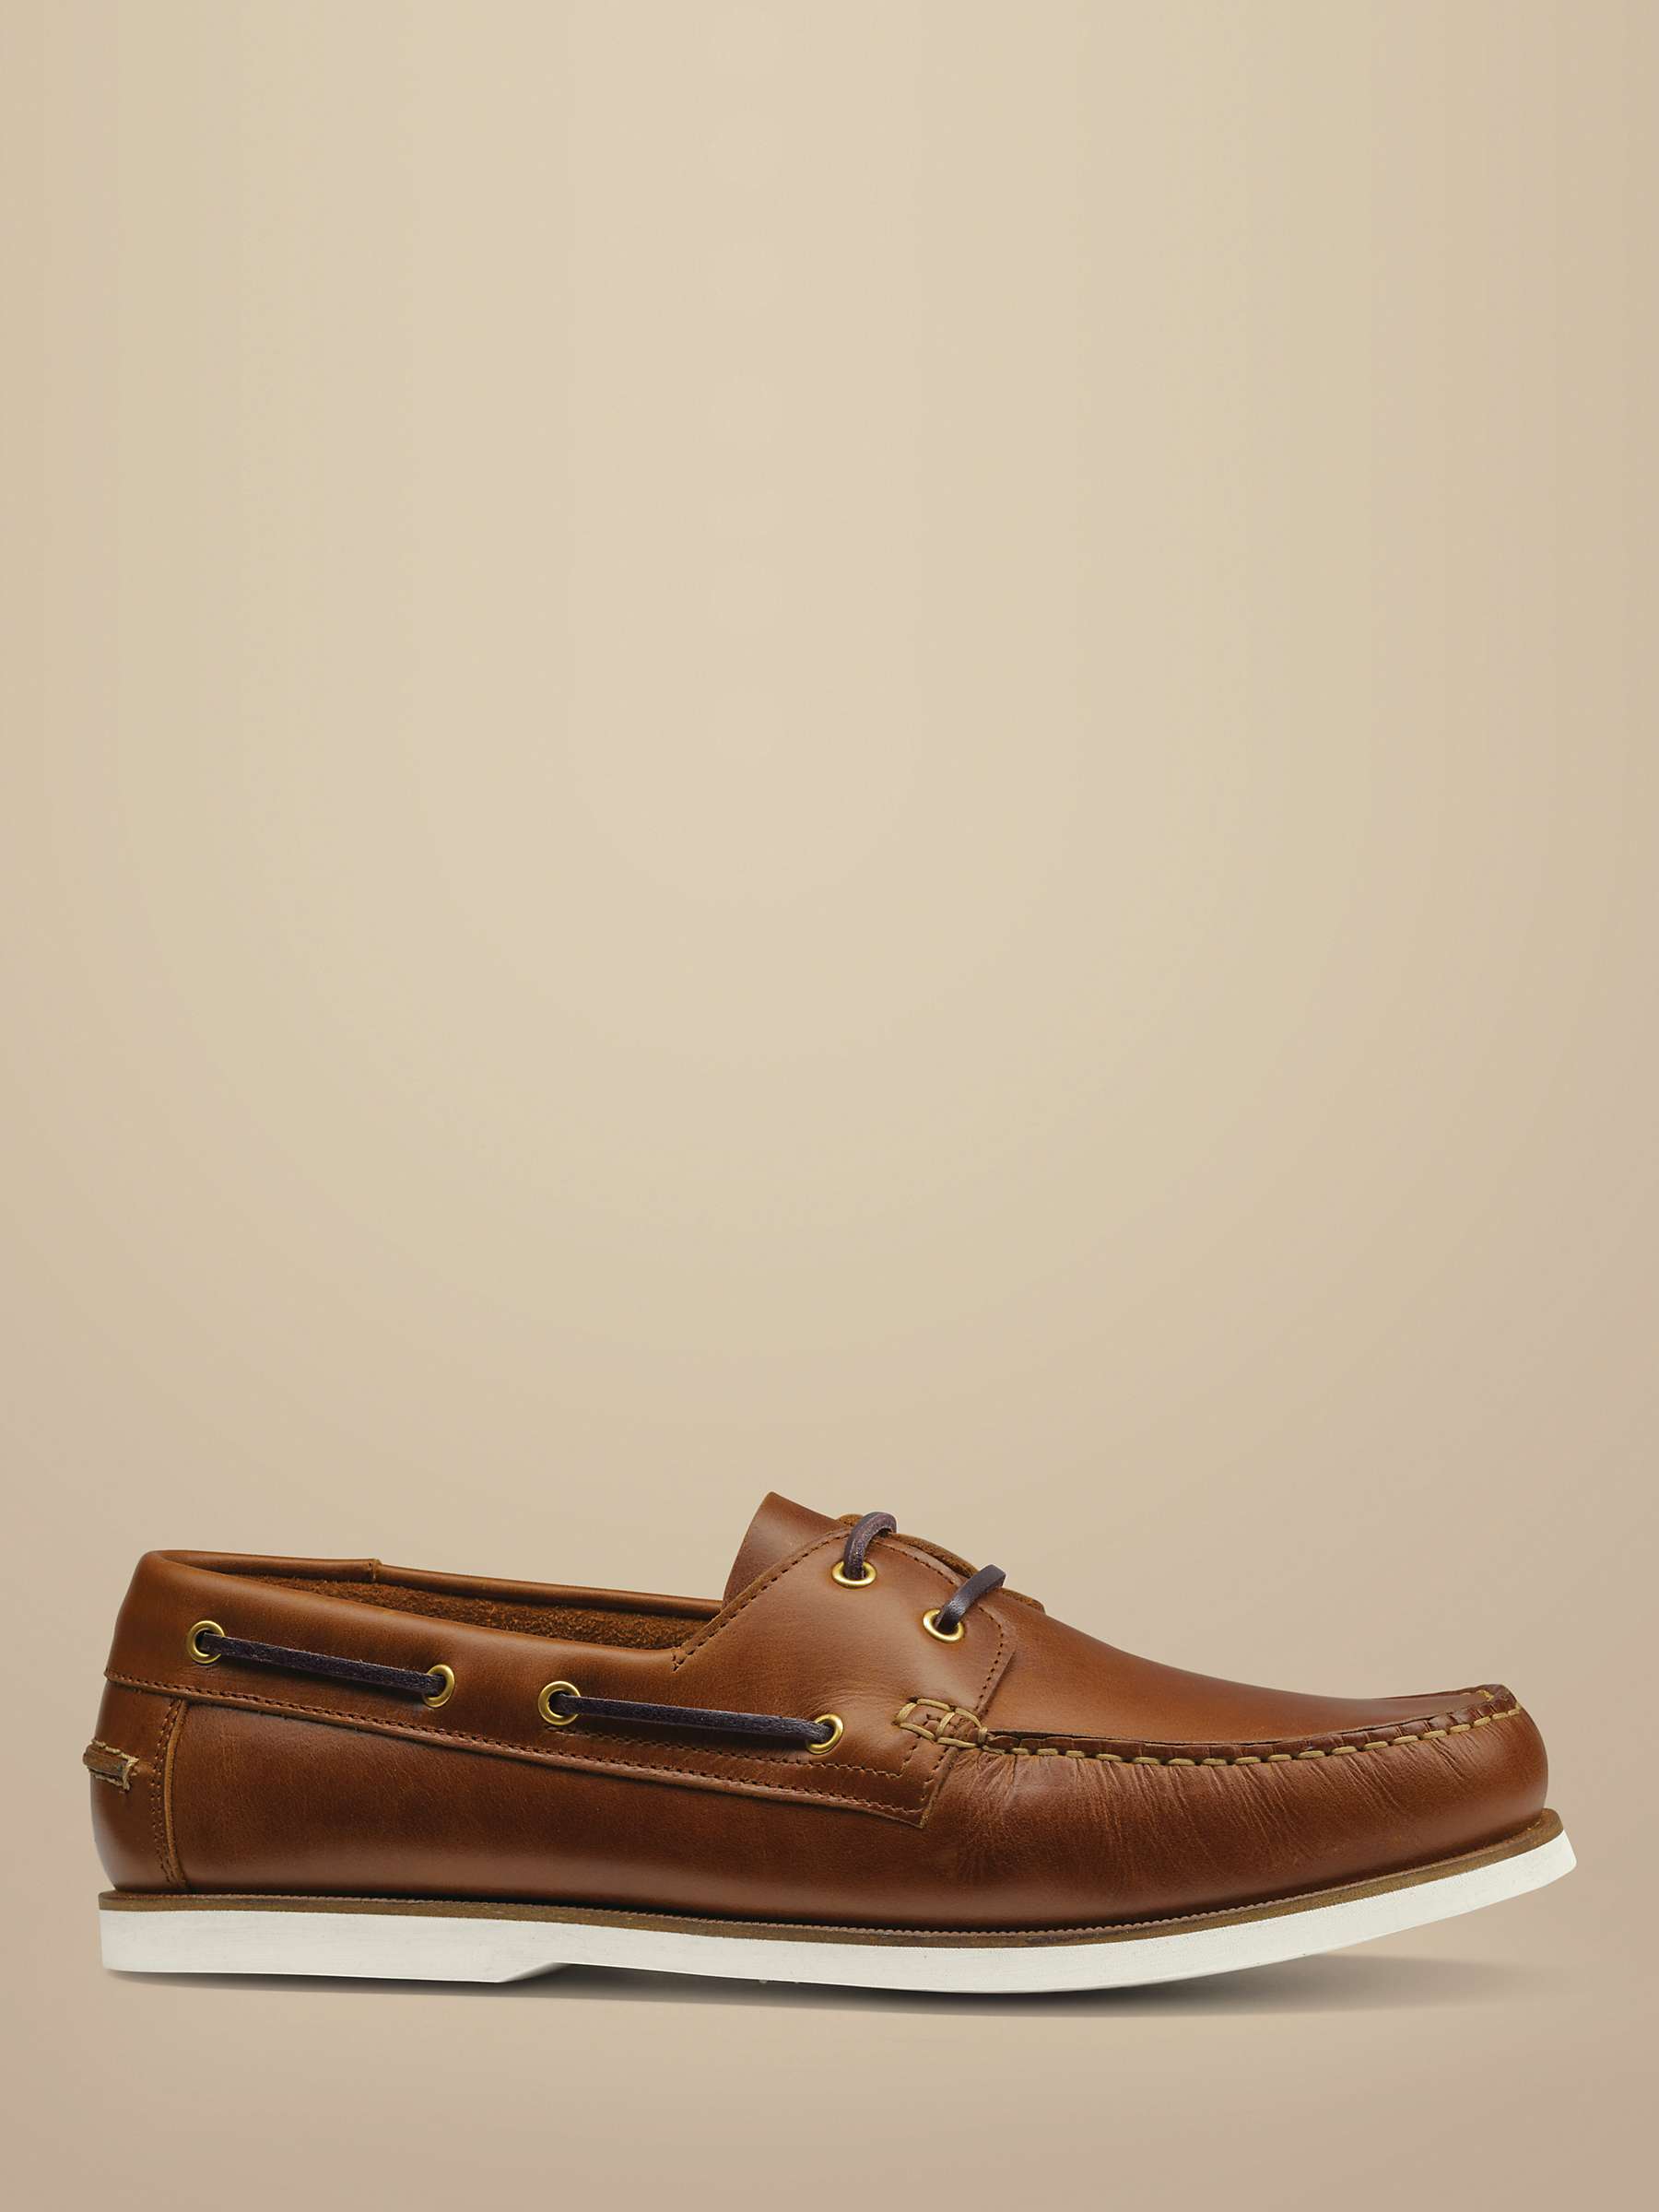 Buy Charles Tyrwhitt Leather Boat Shoes Online at johnlewis.com